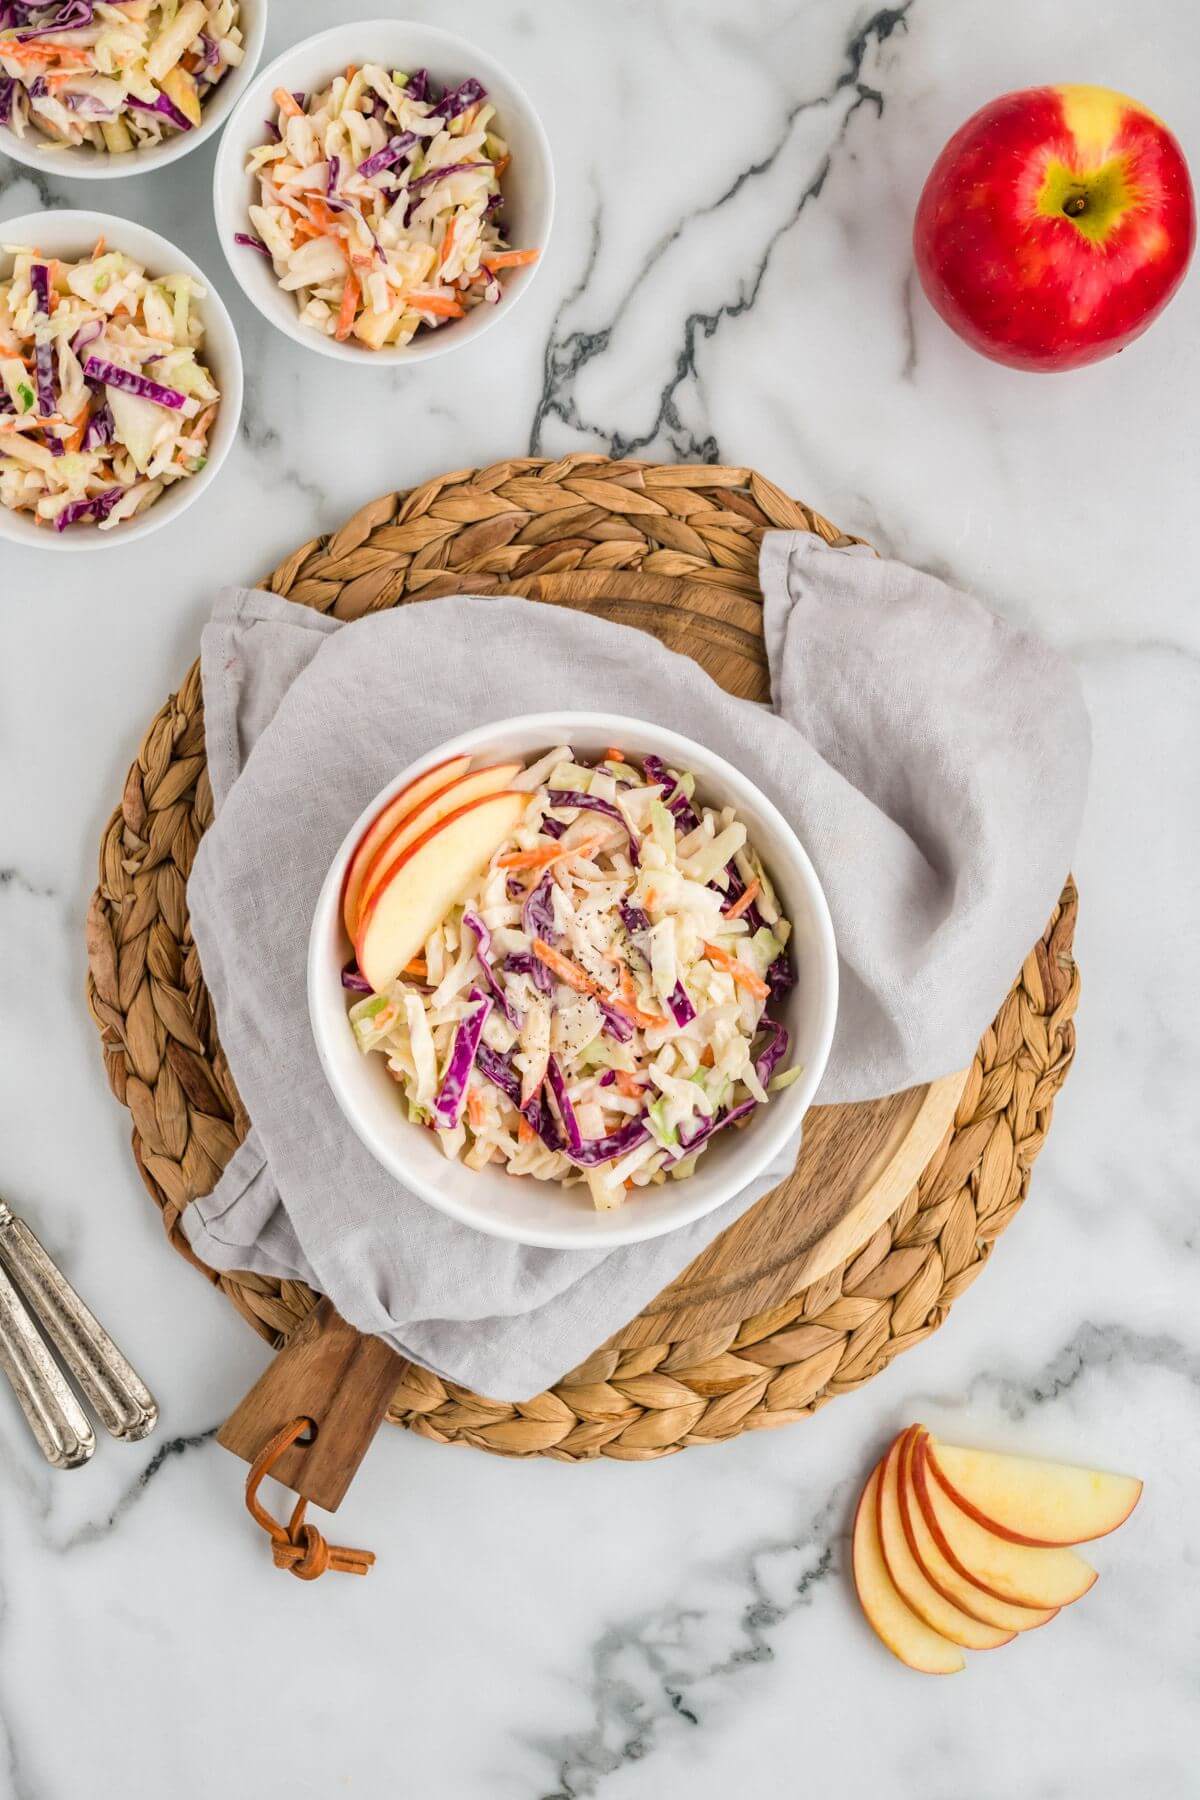 One bowl of coleslaw is centered on a wicker platter with more bowls and apples behind it.